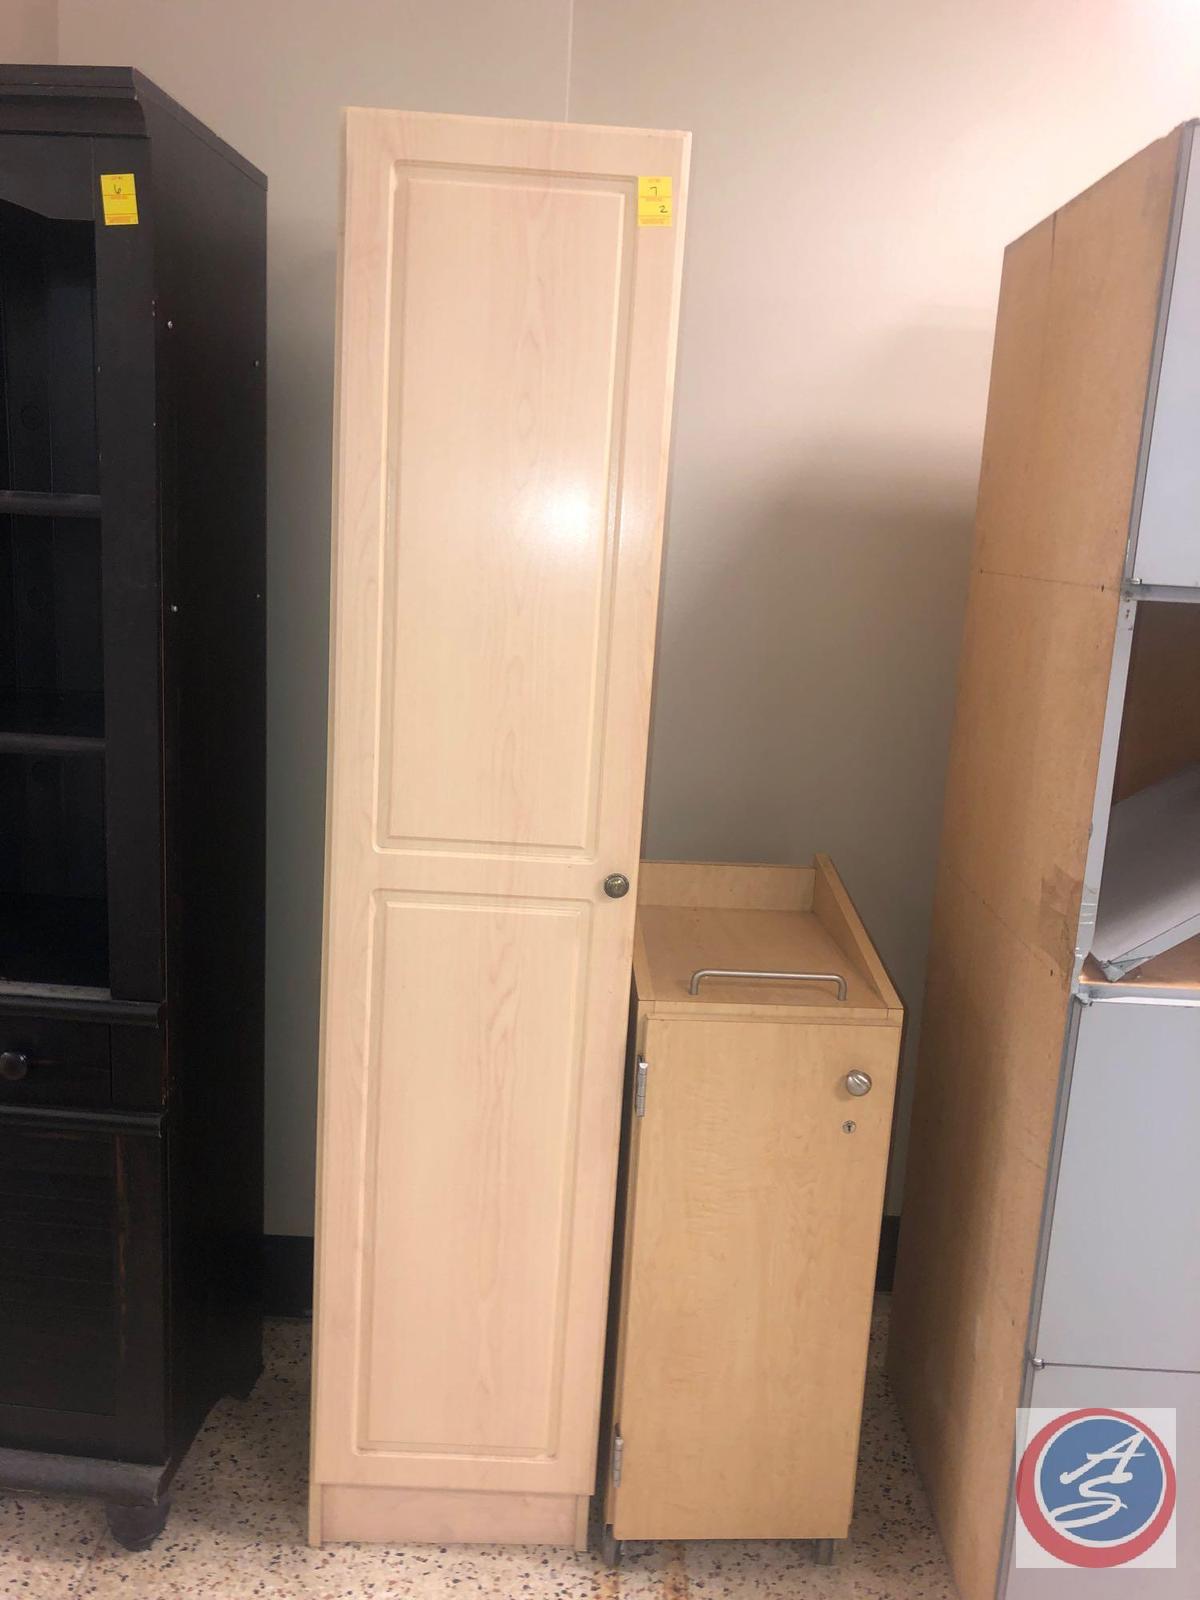 Cabinet w/ Four Shelves and One Door Measuring 15'' x 15'' x 72'', Rolling Cabinet w/ One Locked